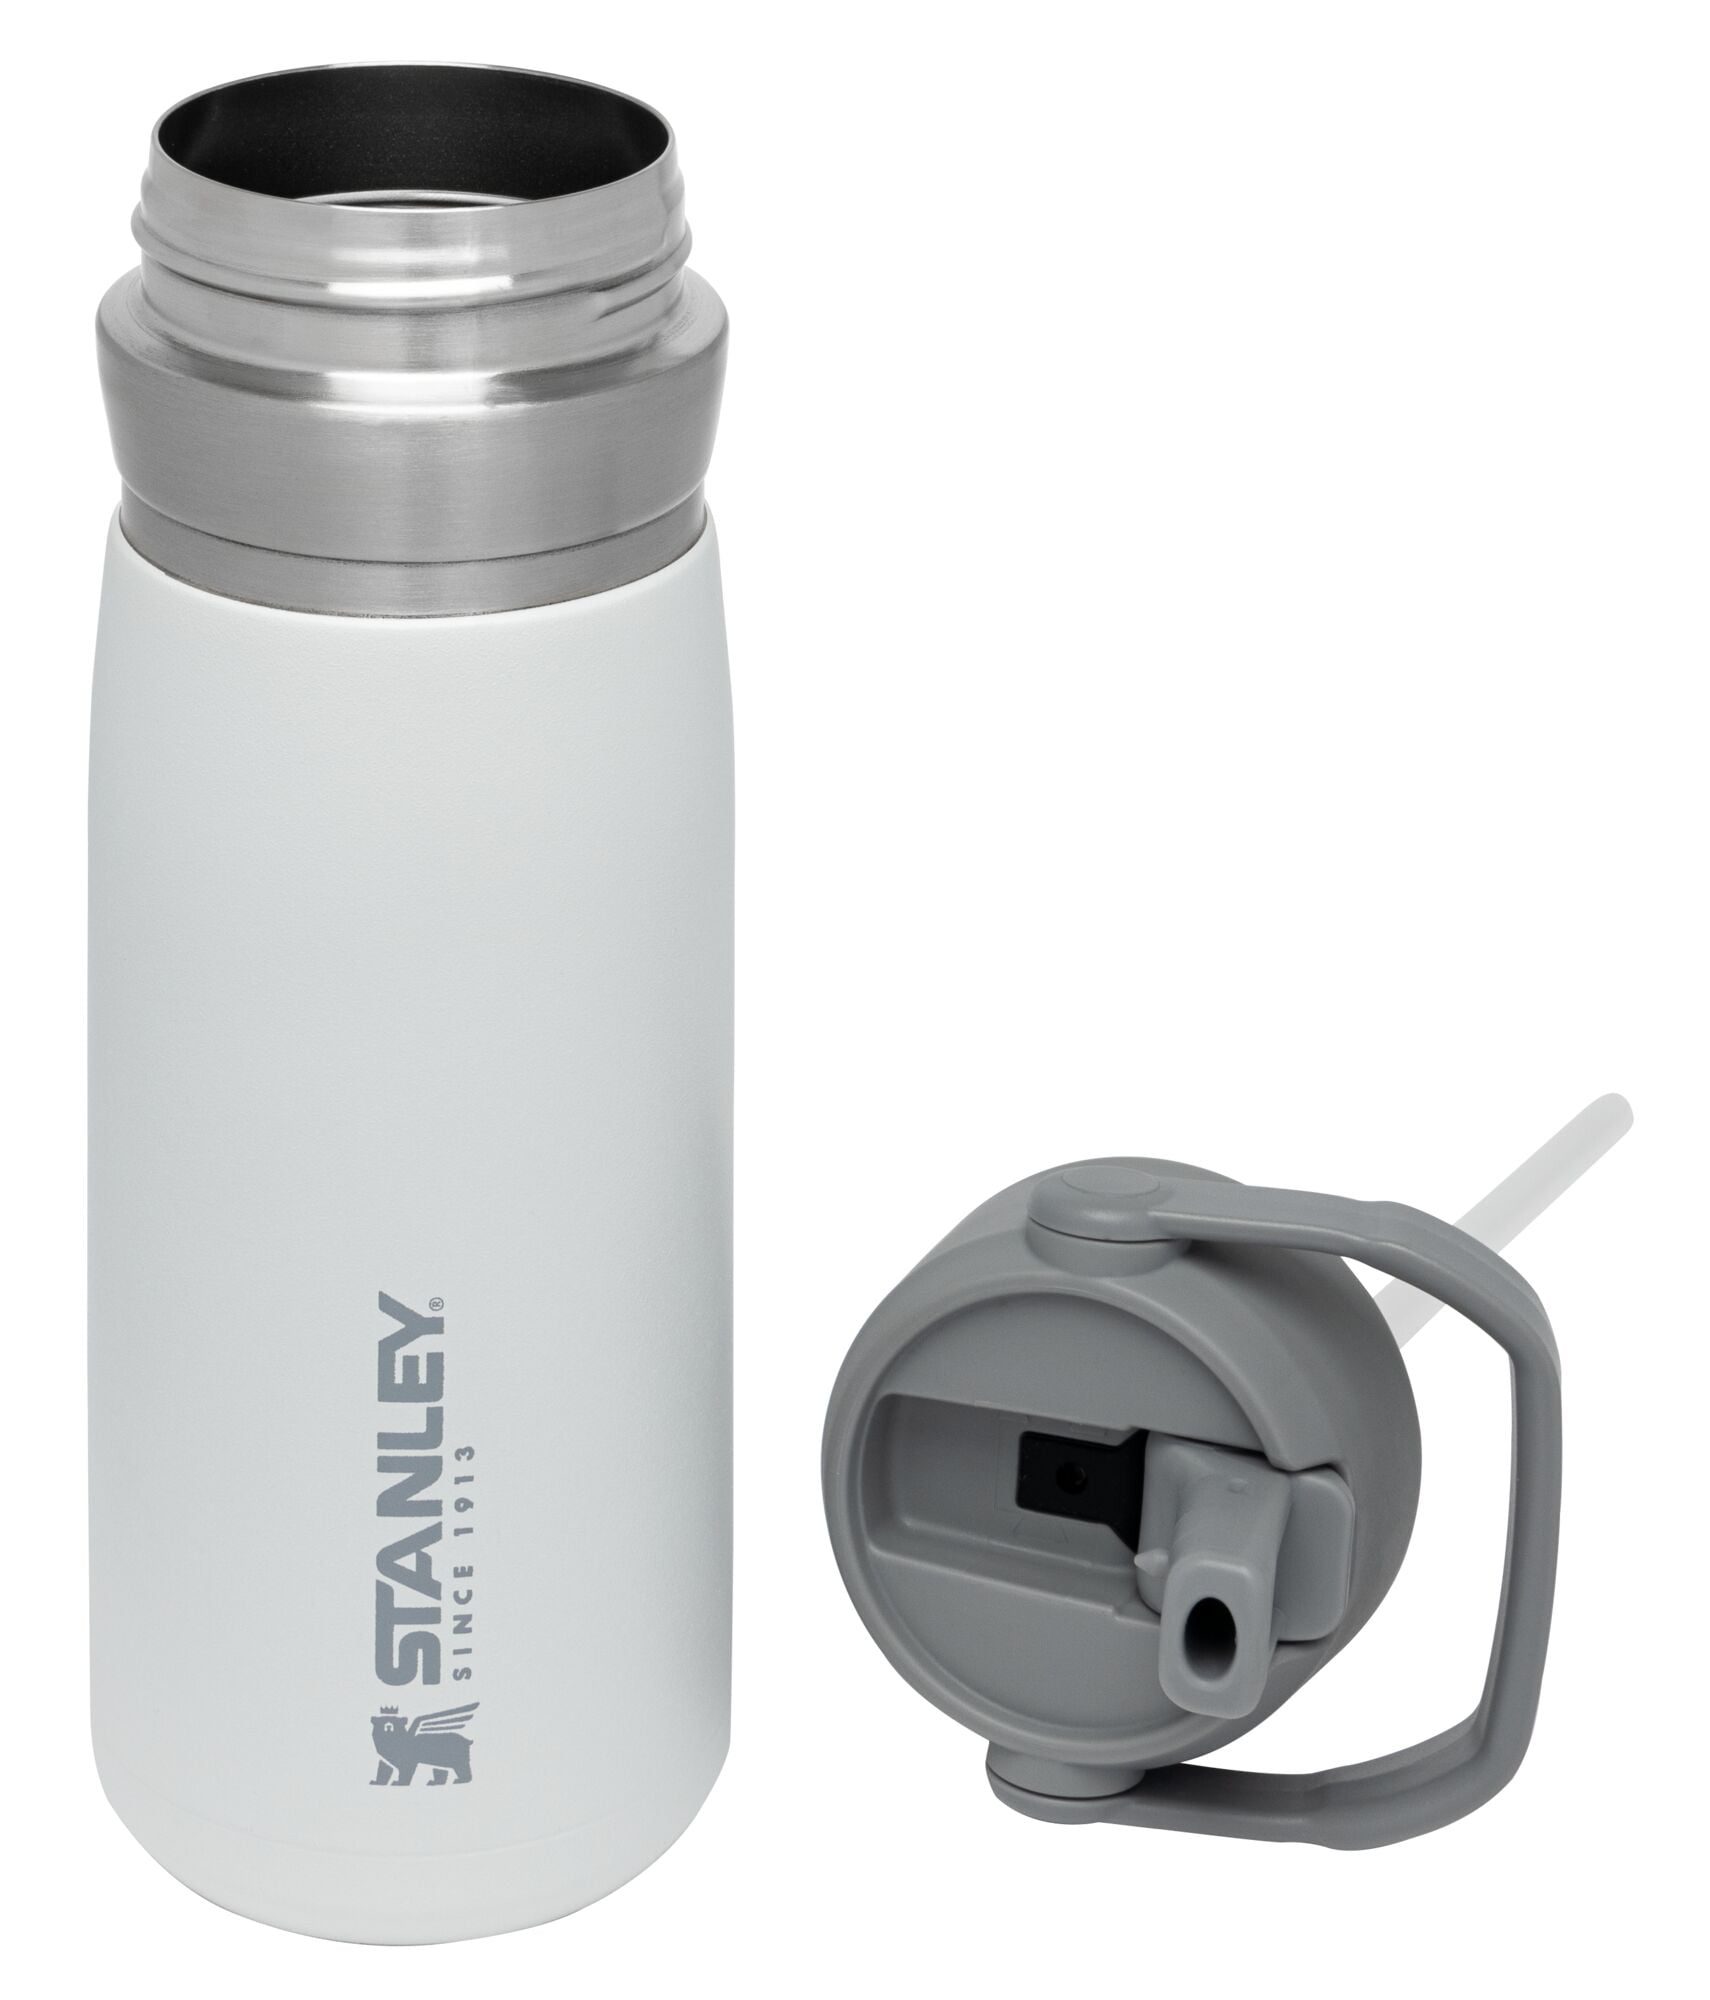 STANLEY 22 oz Lagoon Blue and Gray Insulated Stainless Steel Water Bottle  with Straw and Flip-Top Lid